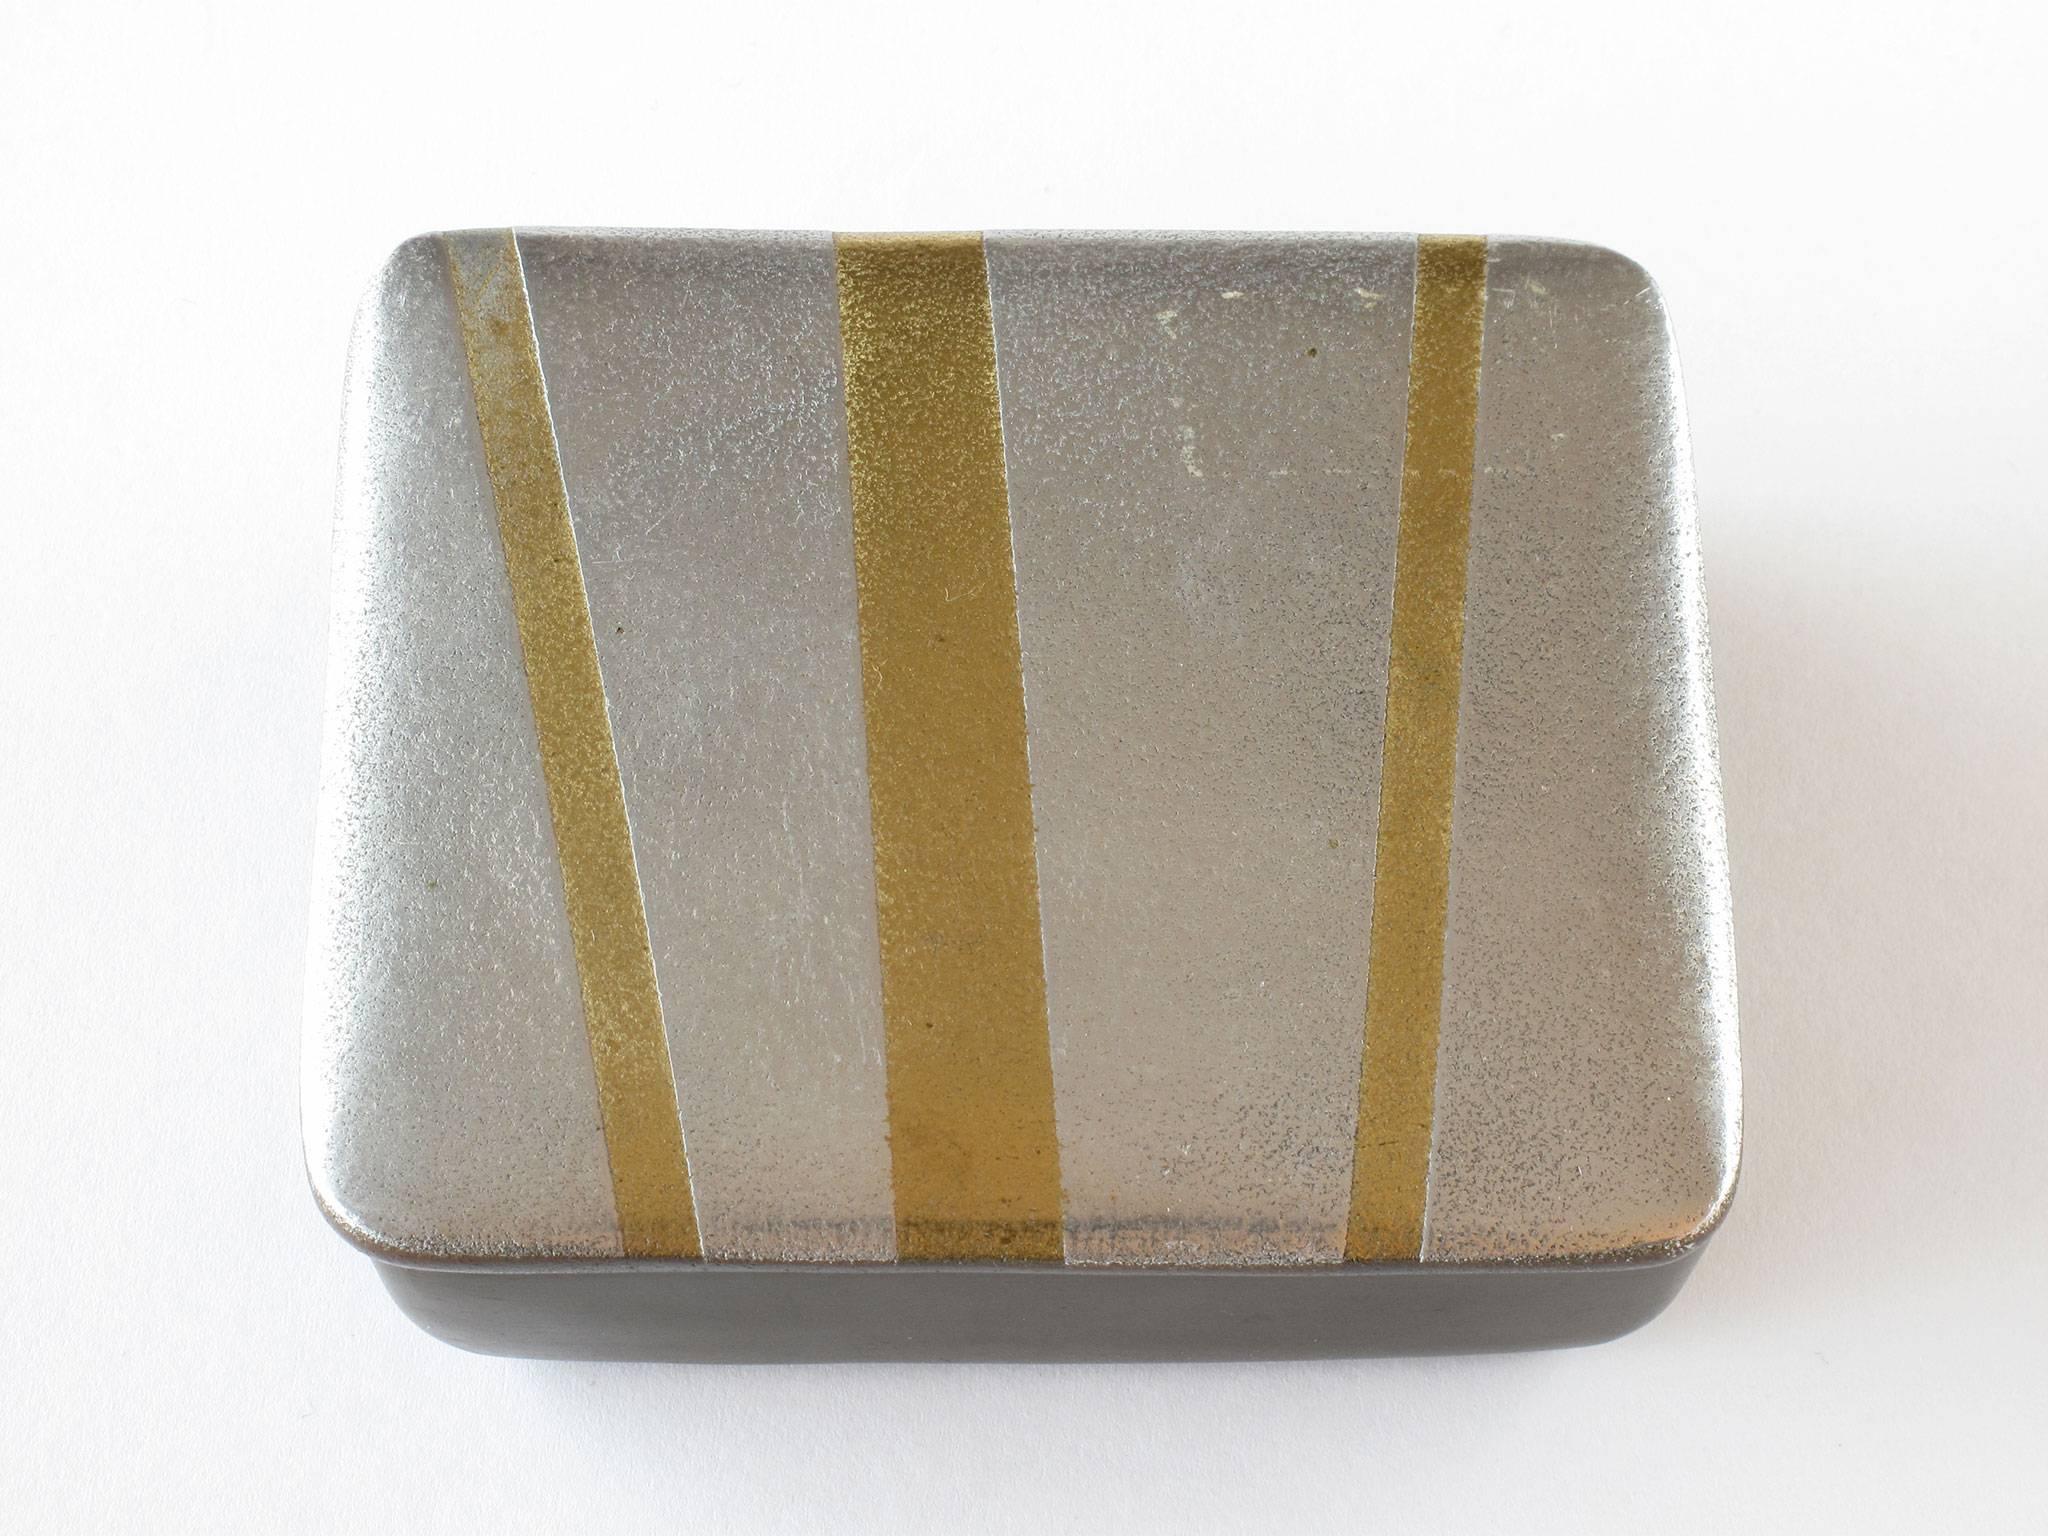 A rare design by Ben Seibel featuring his silver and gold geometric lined shapes on a dark brown enamel base, cork lined interior and felted bottom, 1950s, Jenfred Ware, New York, 1 5/8 high x 4 1/2 wide x 3 7/8 deep inches, signed, excellent